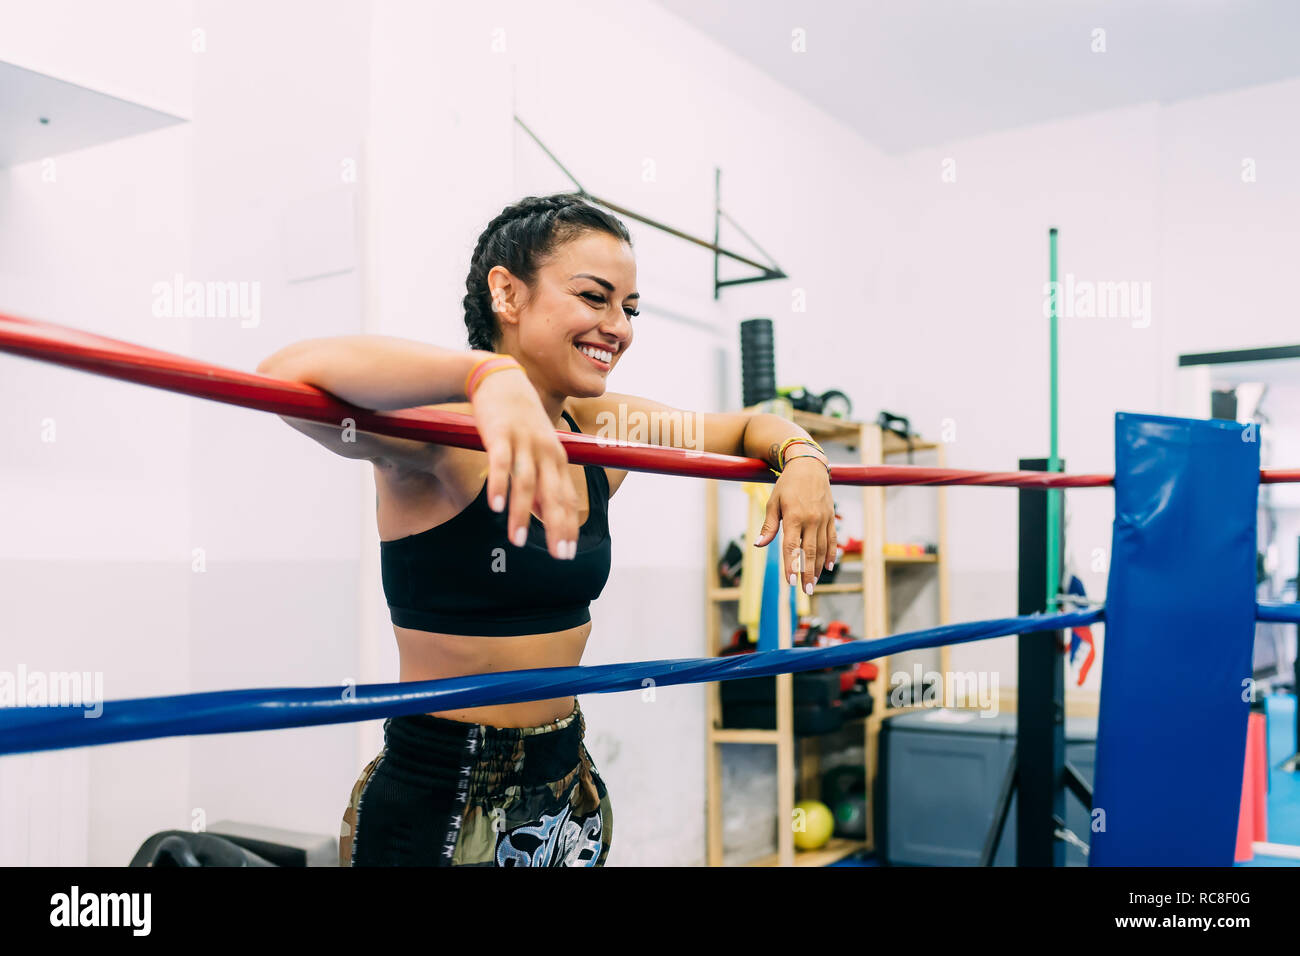 Laughing female boxer leaning over boxing ring ropes Stock Photo